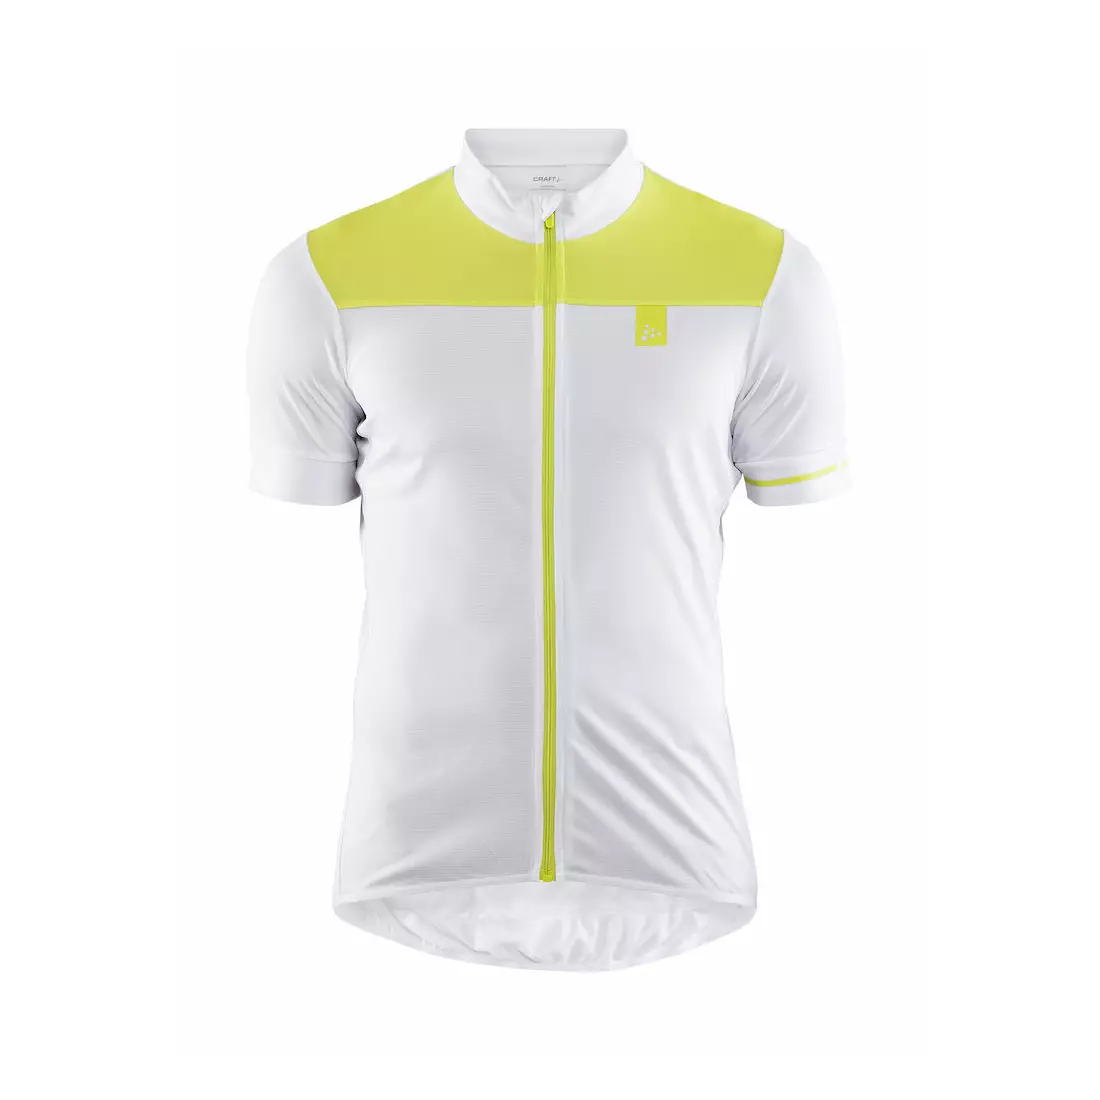 CRAFT POINT men's cycling jersey, white and green, 1906098-900611